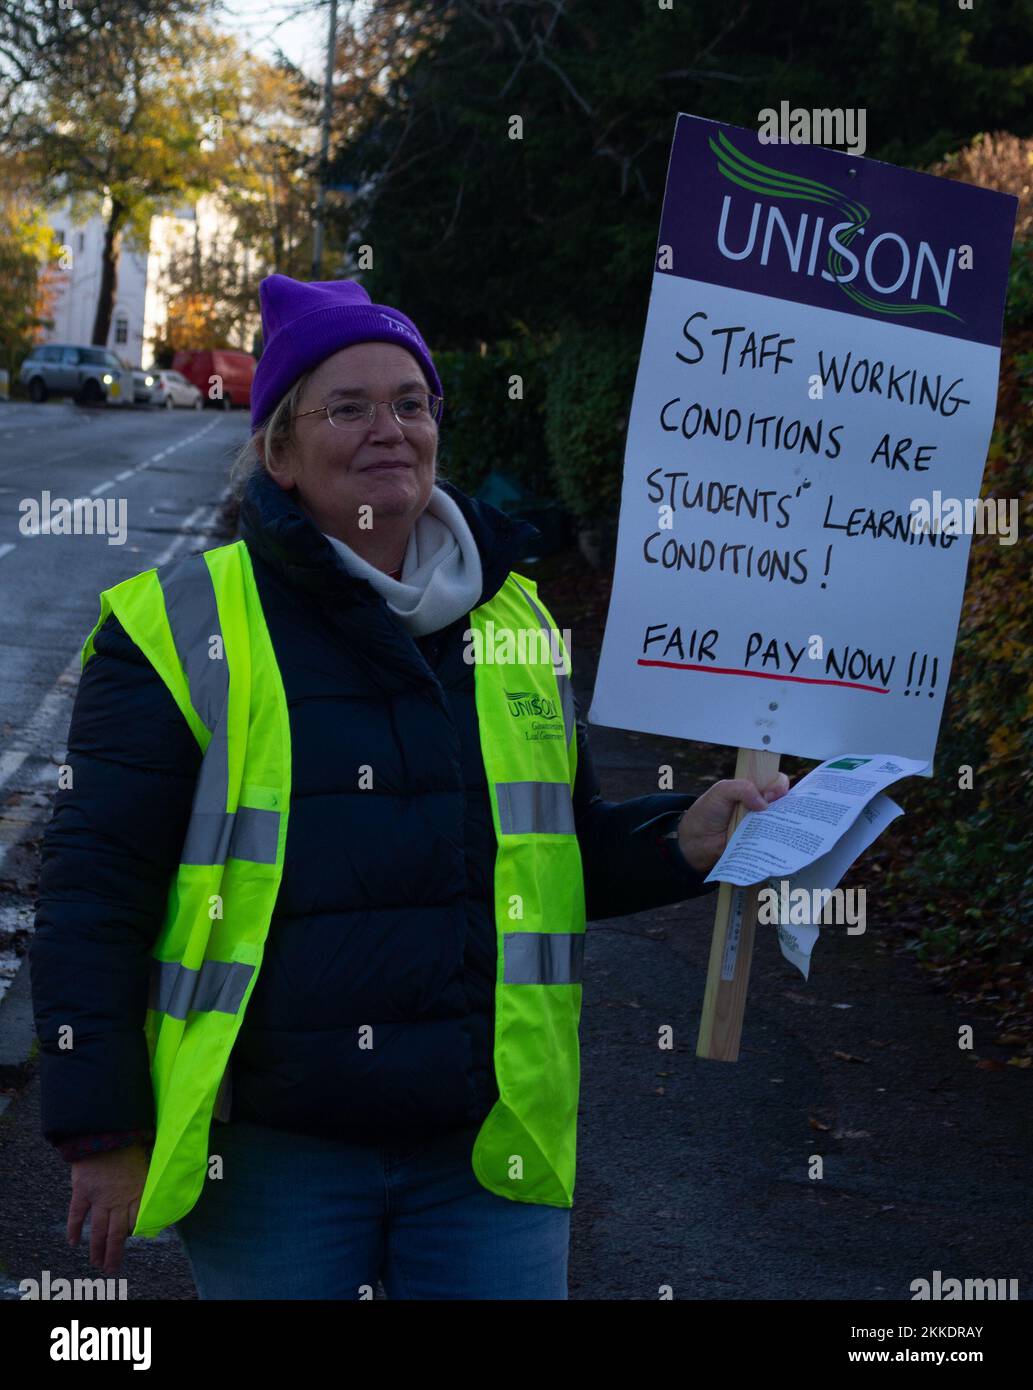 Cheltenham, UK. 25th Nov, 2022. 25th of November 2022, University lecturers on strike outside Park Campus at Gloucestershire University. Holding signs out to cars passing by. Credit: Pathos Images/Alamy Live News Stock Photo